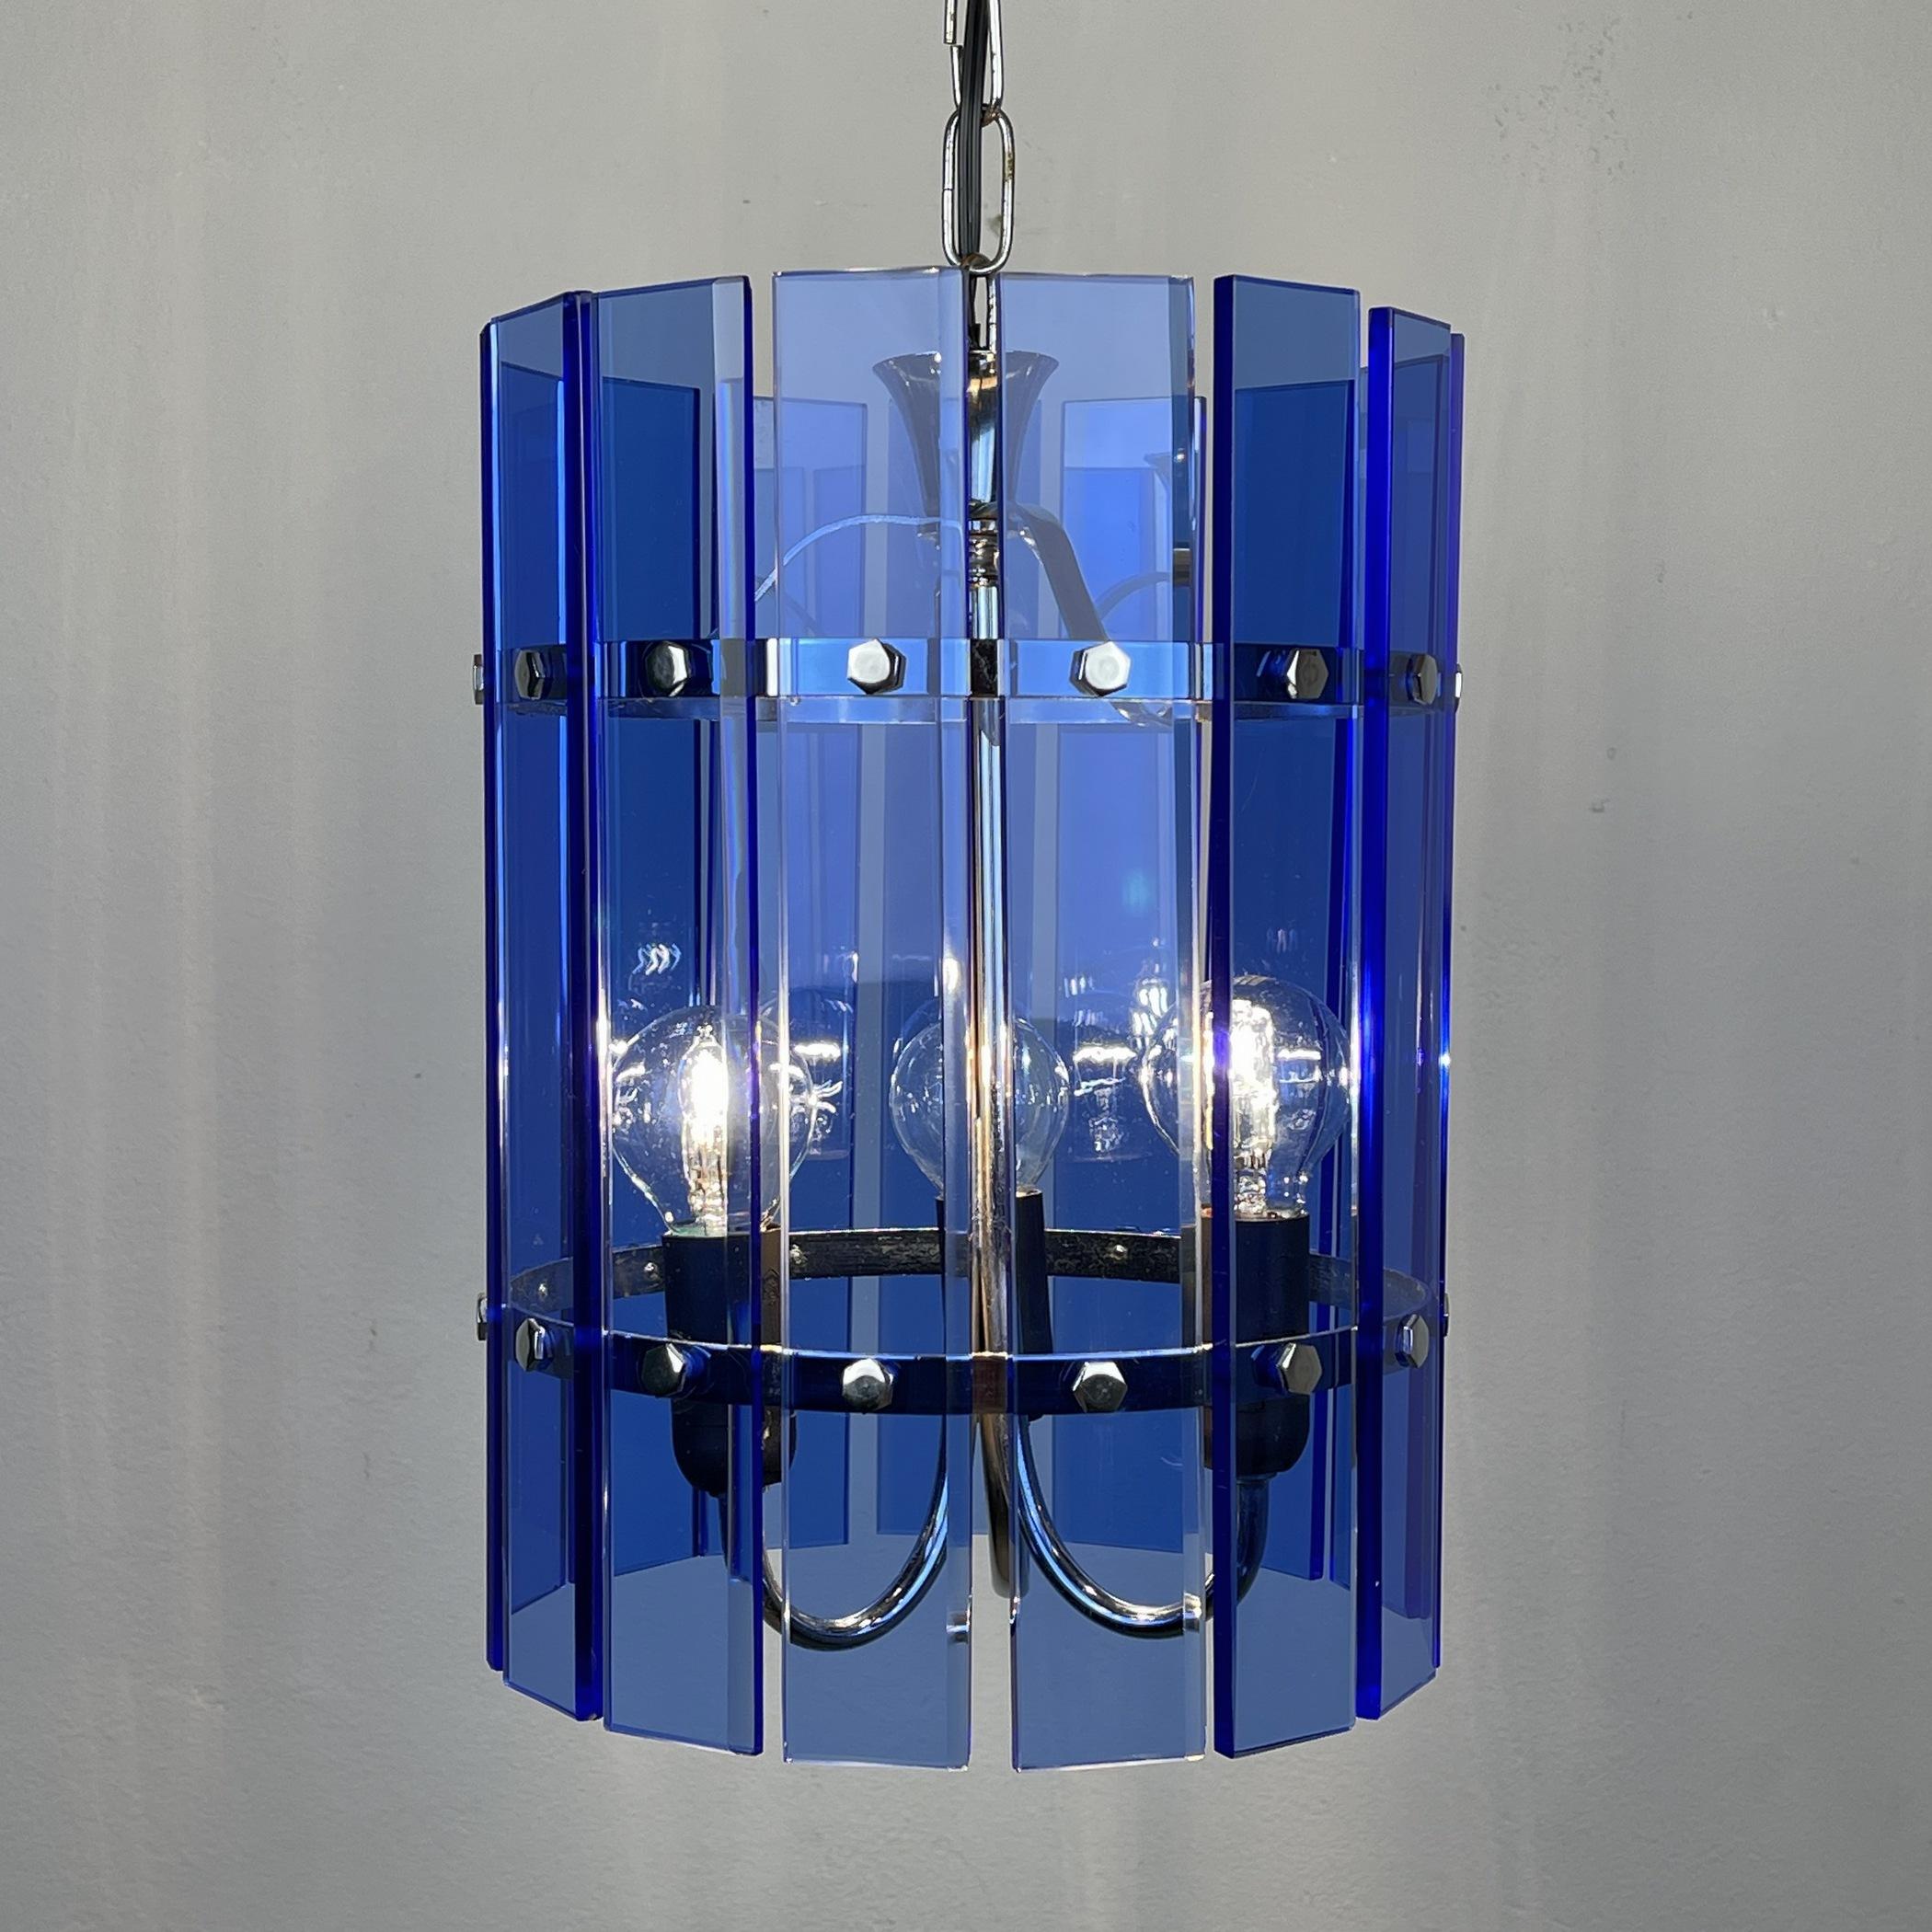 The beautiful vintage pendant lamp Veca Fontana Arte, chrome, and blue glass, sputnik, atomic, vintage Italian, 3 lamp chandelier, pendant, or ceiling light from the 1960s made in Italy. The shades, in blue-colored glass, are in excellent condition.